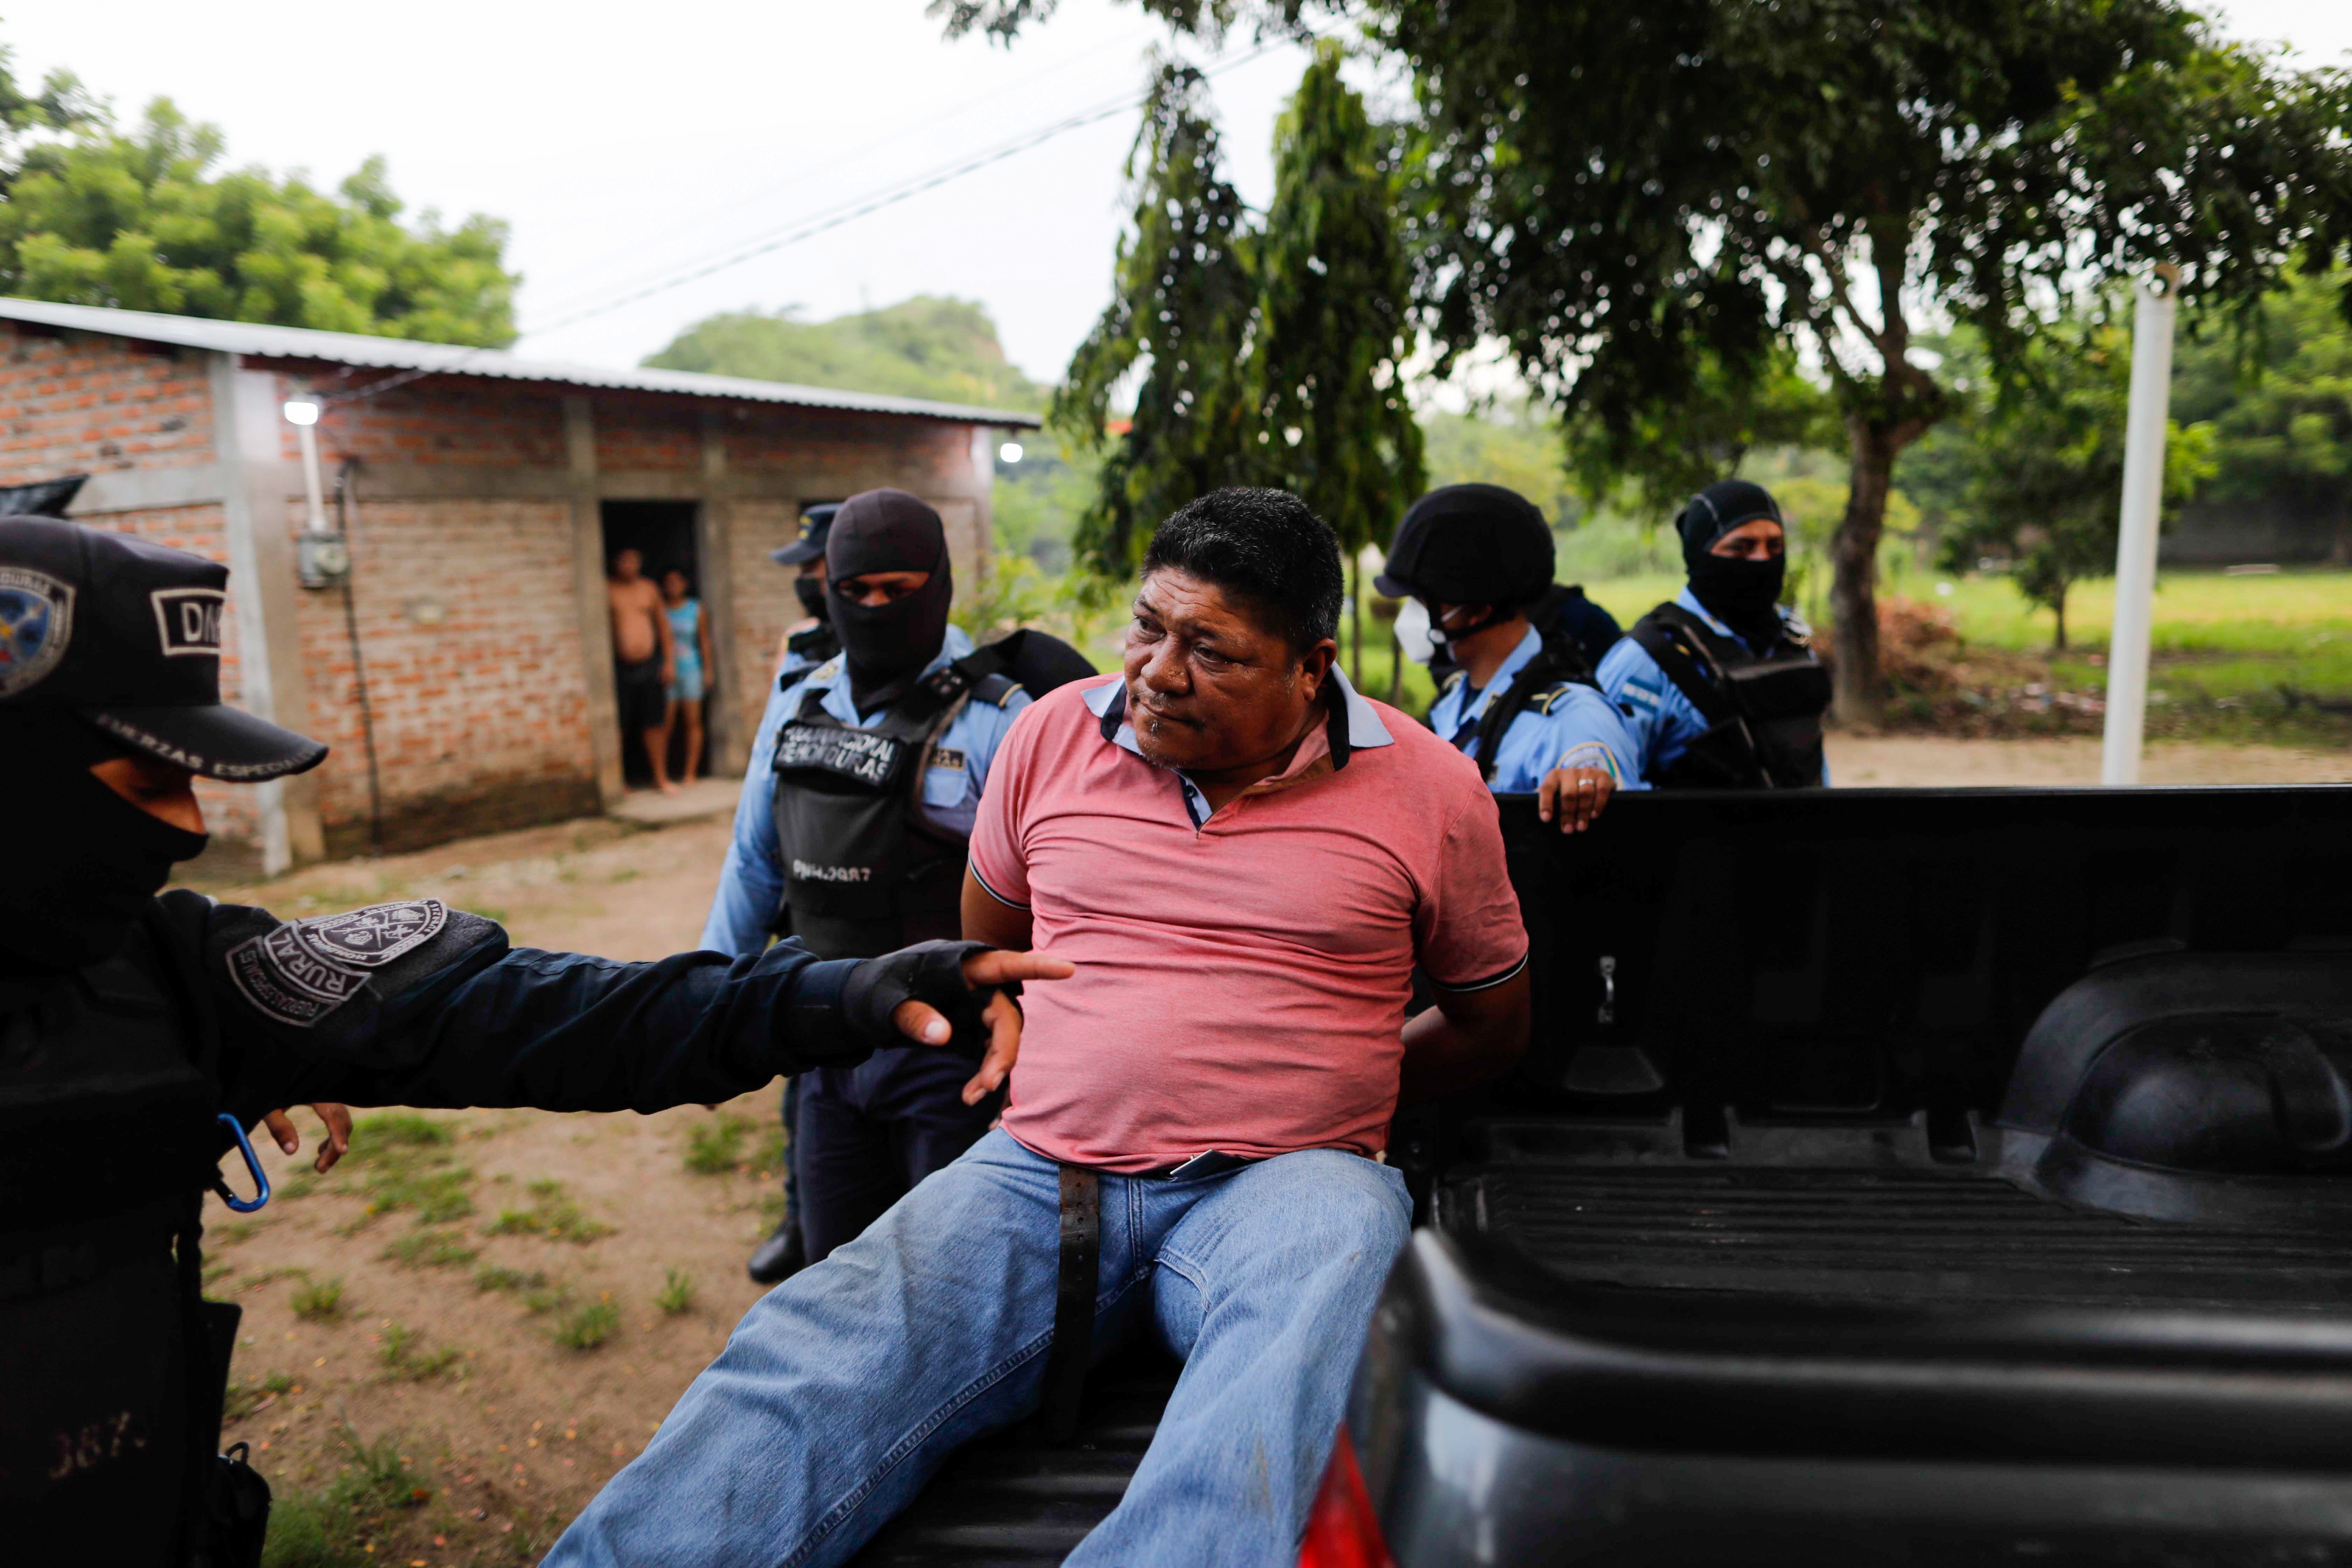 Honduran police officers detain a man on suspicion for his role in killing Giorgio Scanu, 65, who was lynched by a mob of more than 600 villagers in revenge for allegedly murdering a homeless man